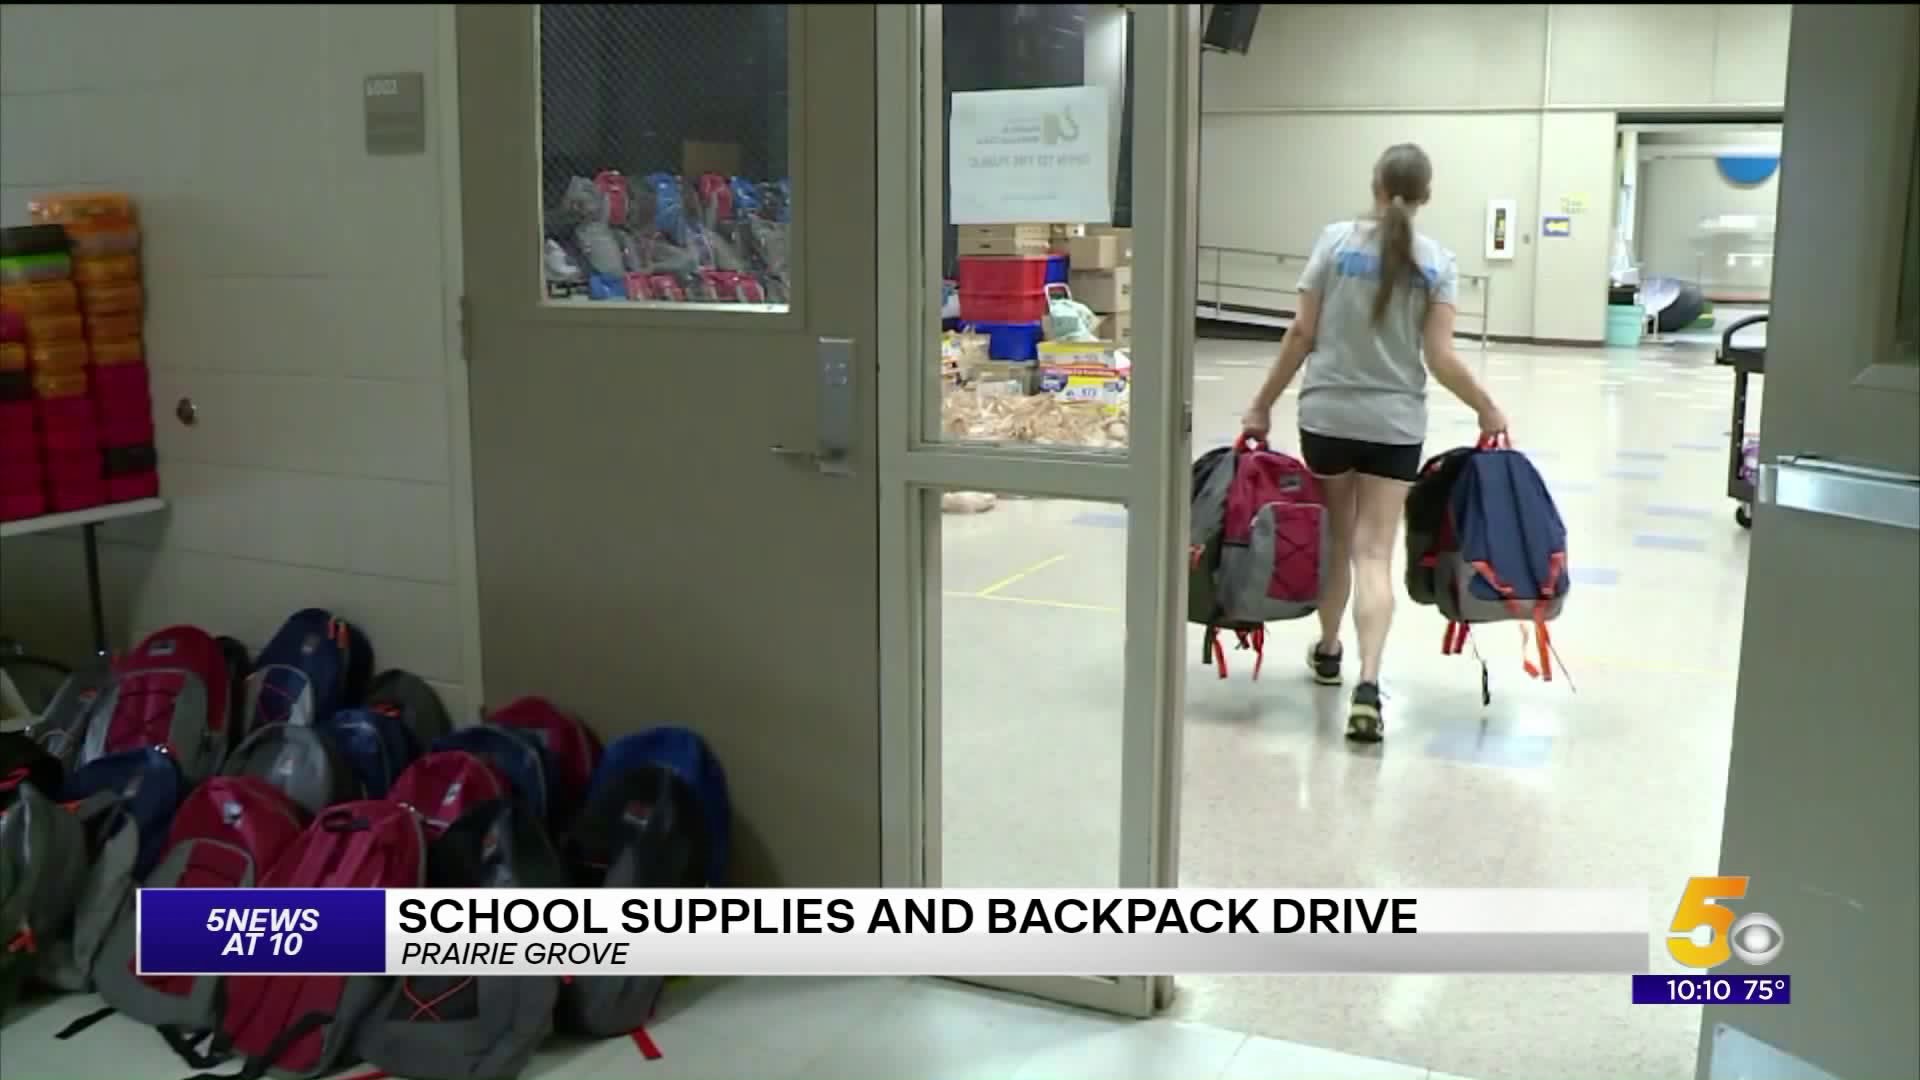 School Supply and Backpack Drive